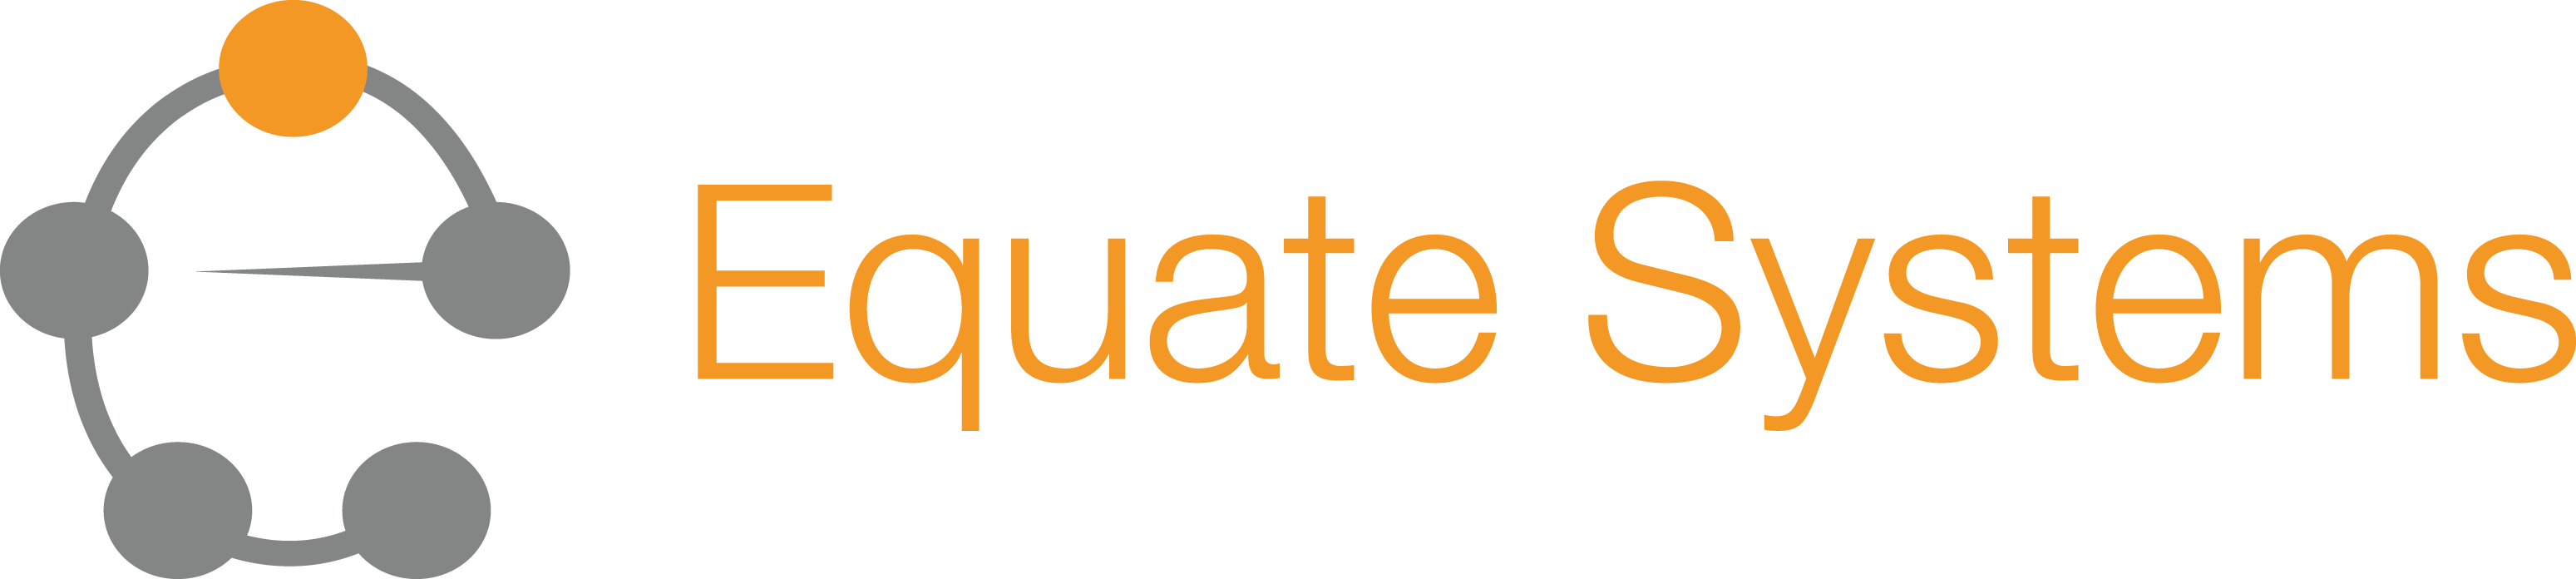 Equate Systems